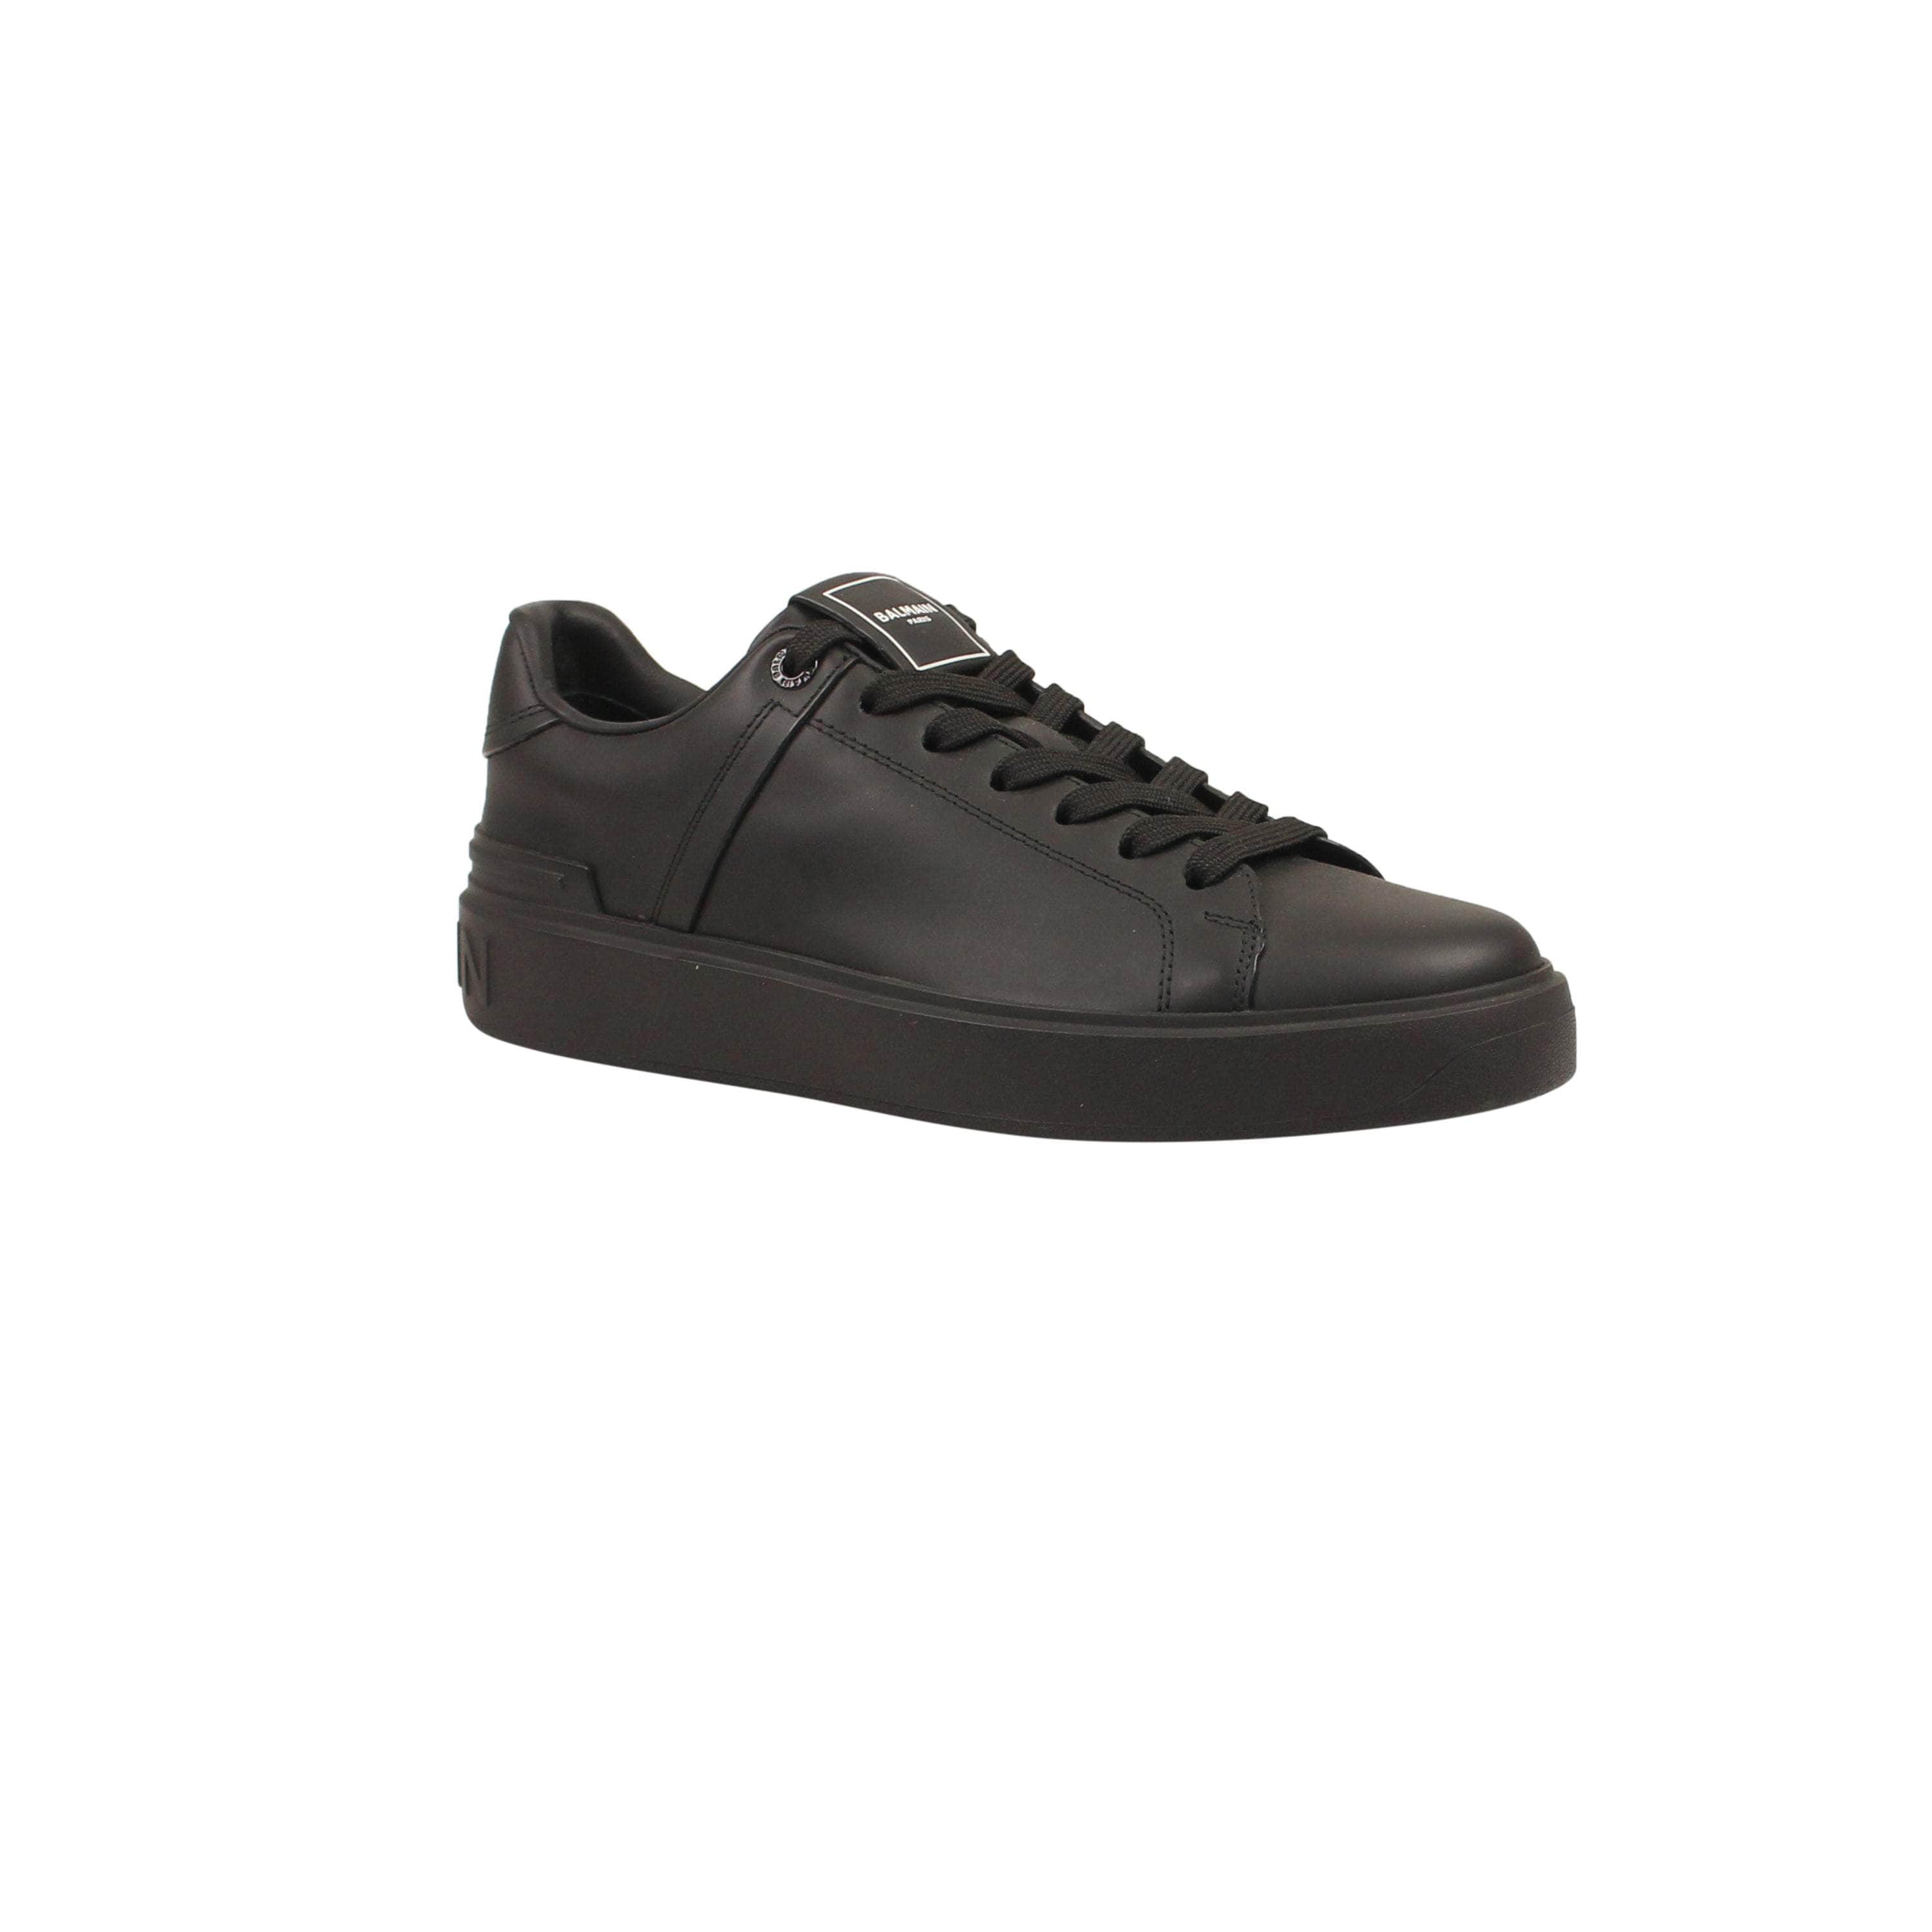 Balmain 500-750, channelenable-all, chicmi, couponcollection, main-shoes, shop375, size-39, Stadium Goods, stadiumgoods Black B- Court Sneakers